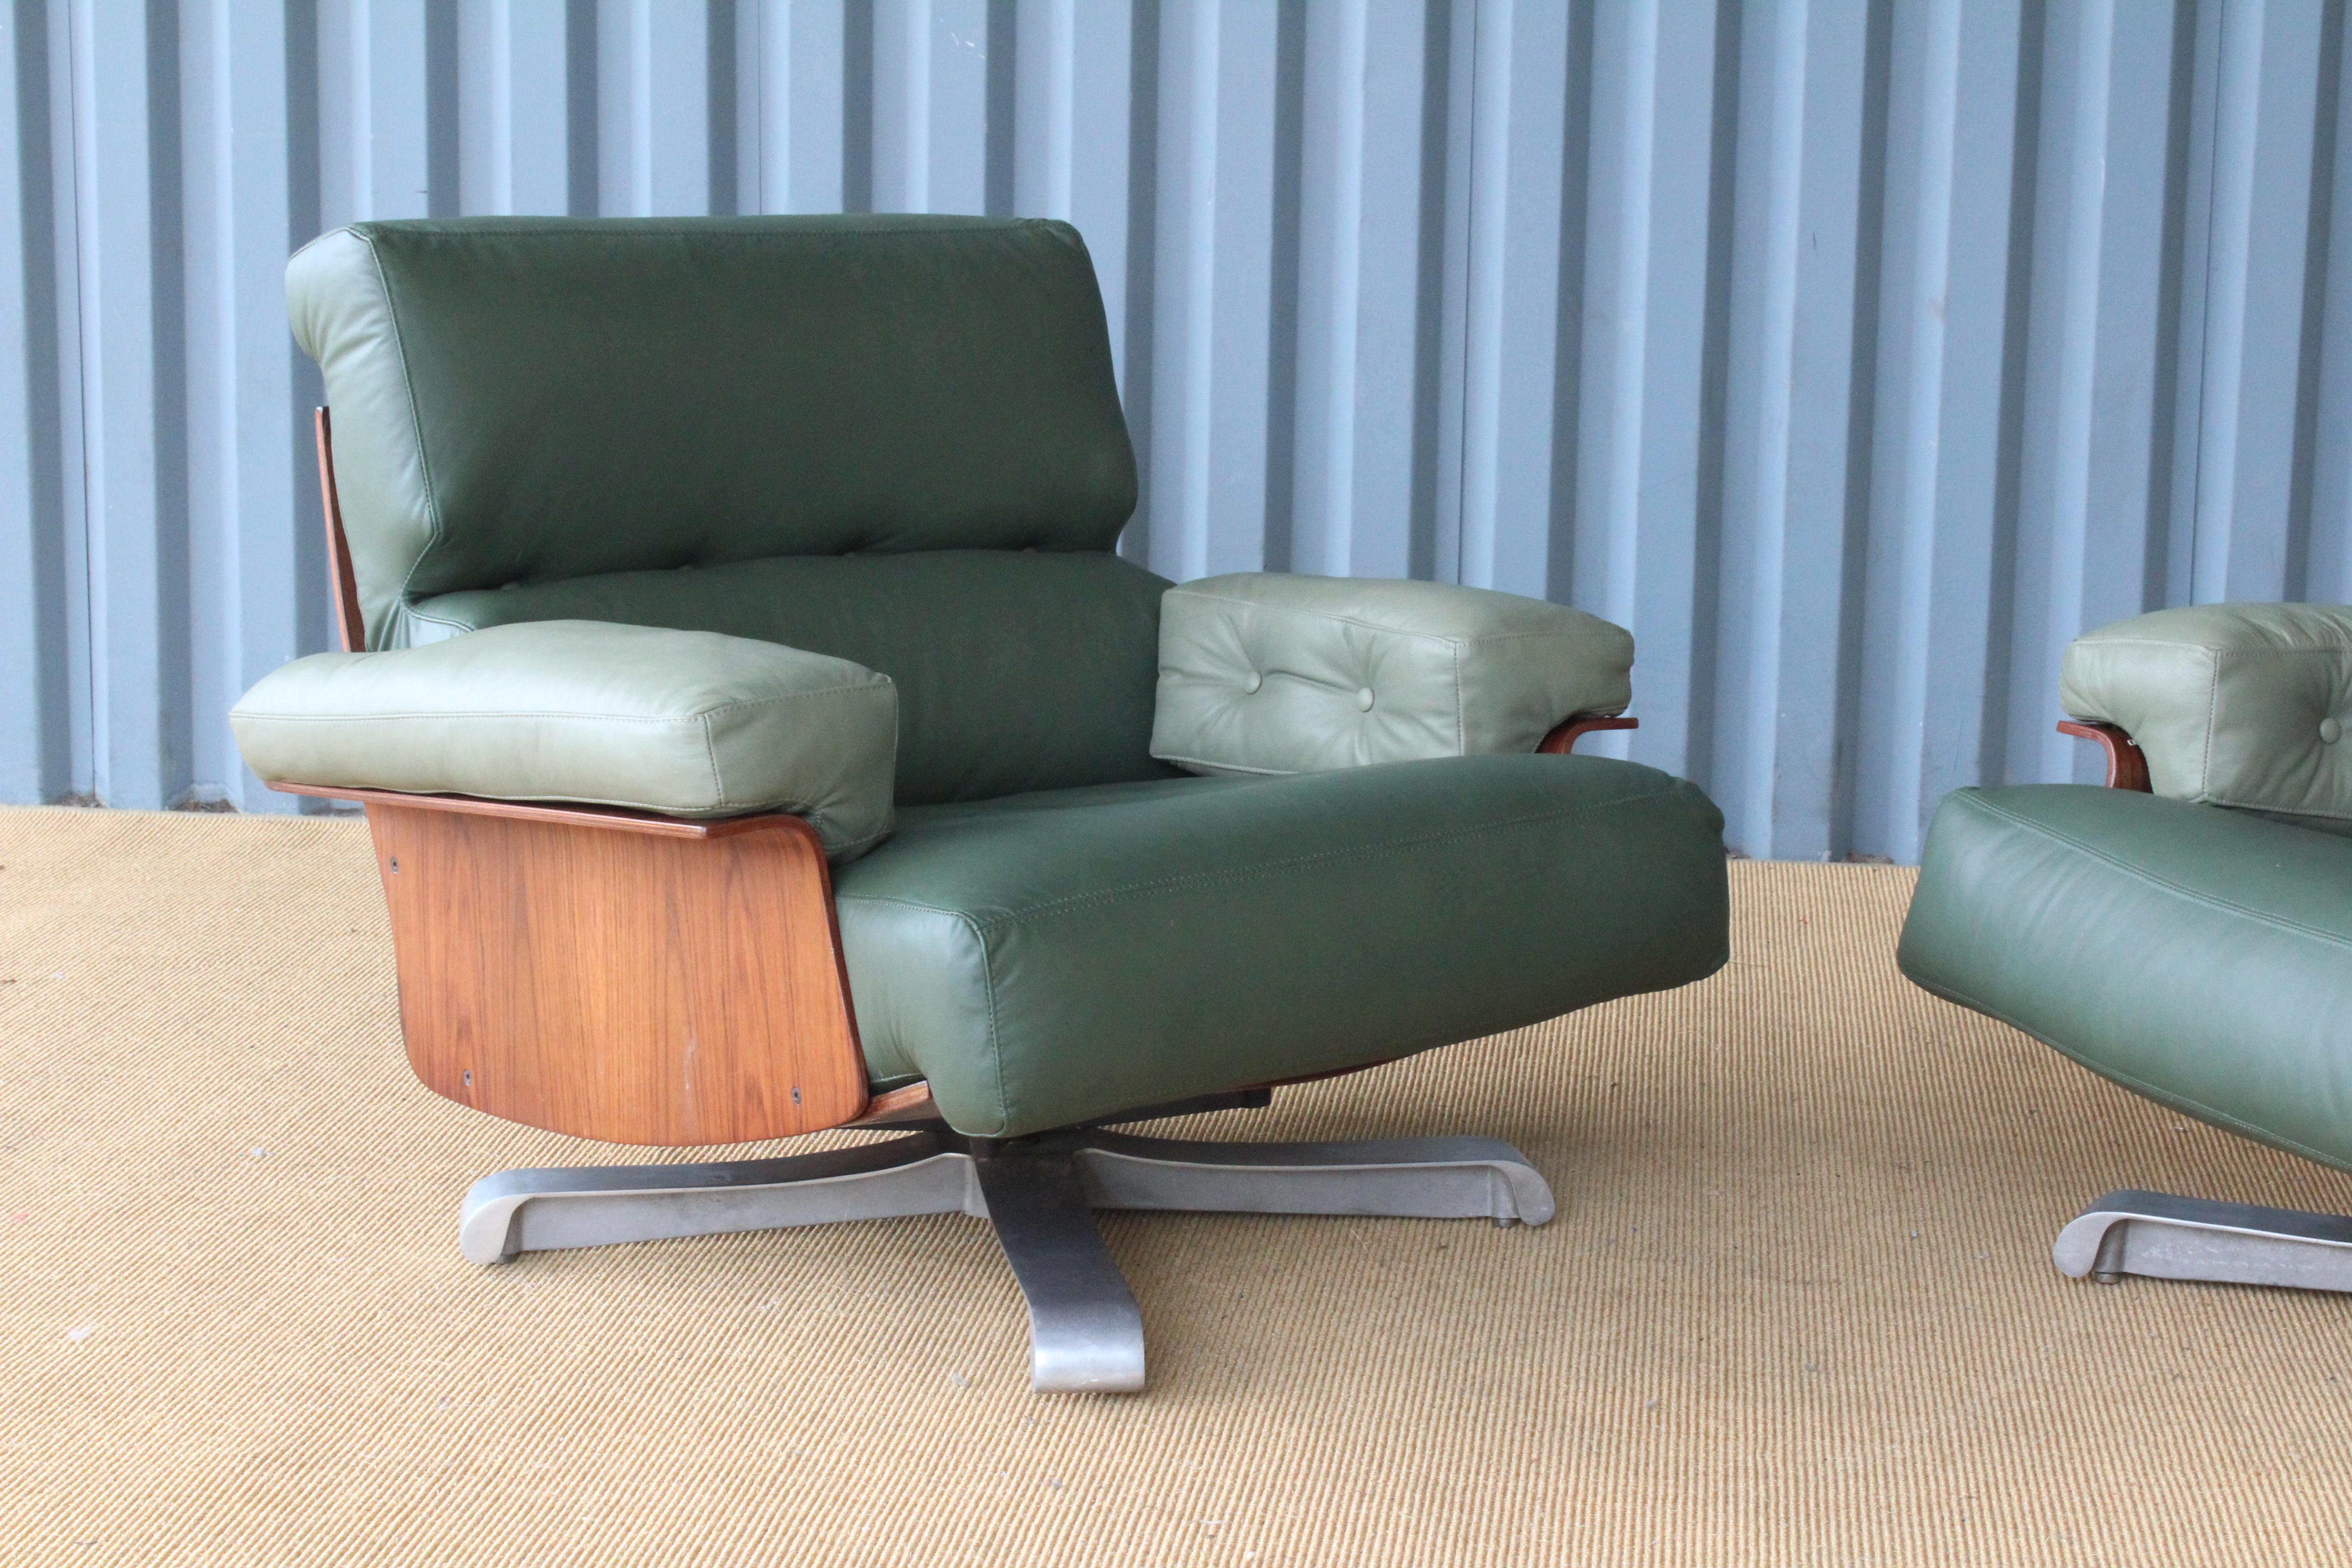 Pair of Brazilian Rosewood Chairs with Leather Upholstery, Brazil, 1960s 1